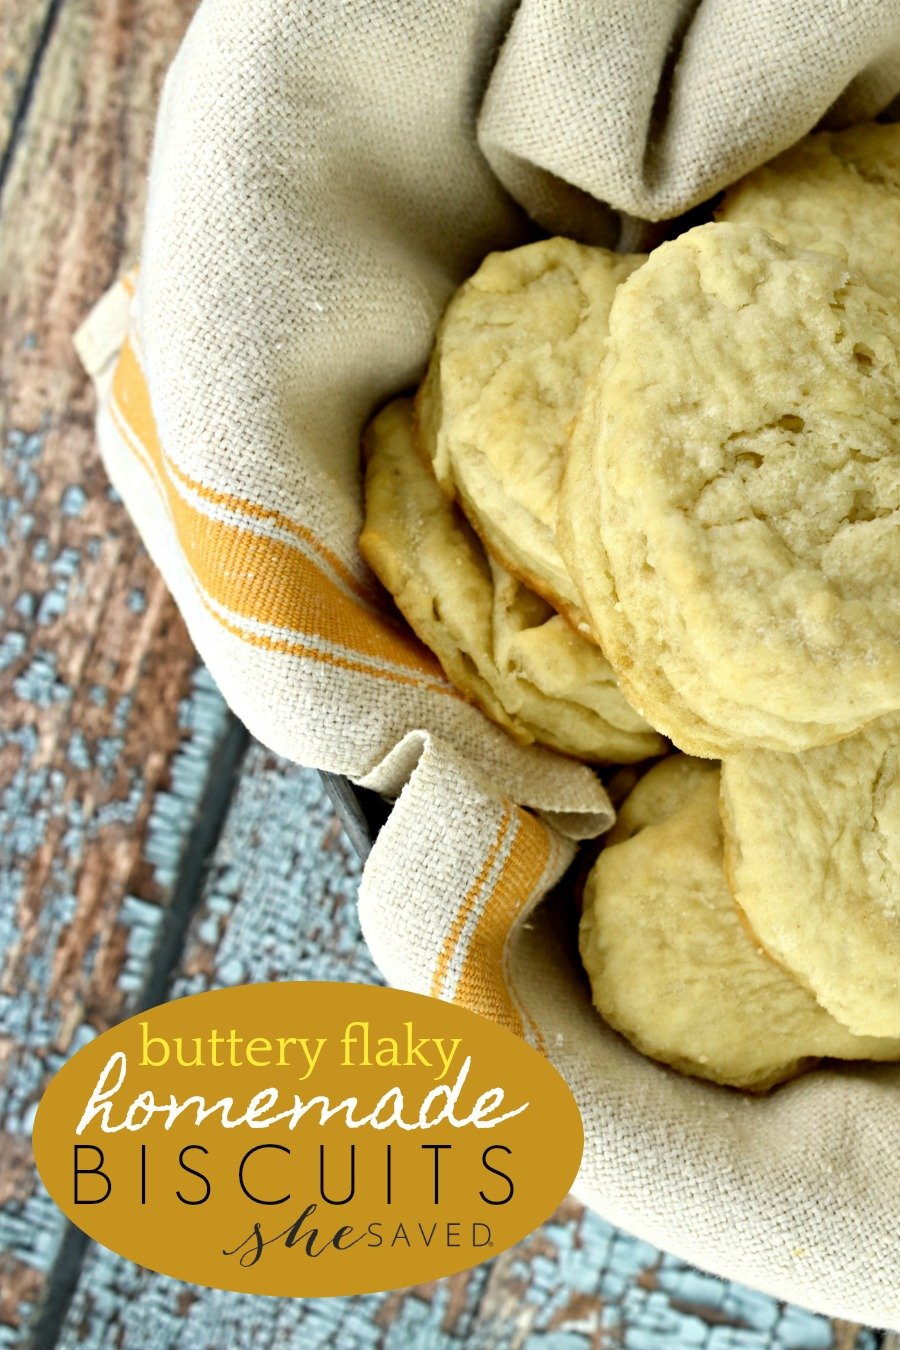 These buttery flaky homemade biscuits are SO good and will become your new favorite!